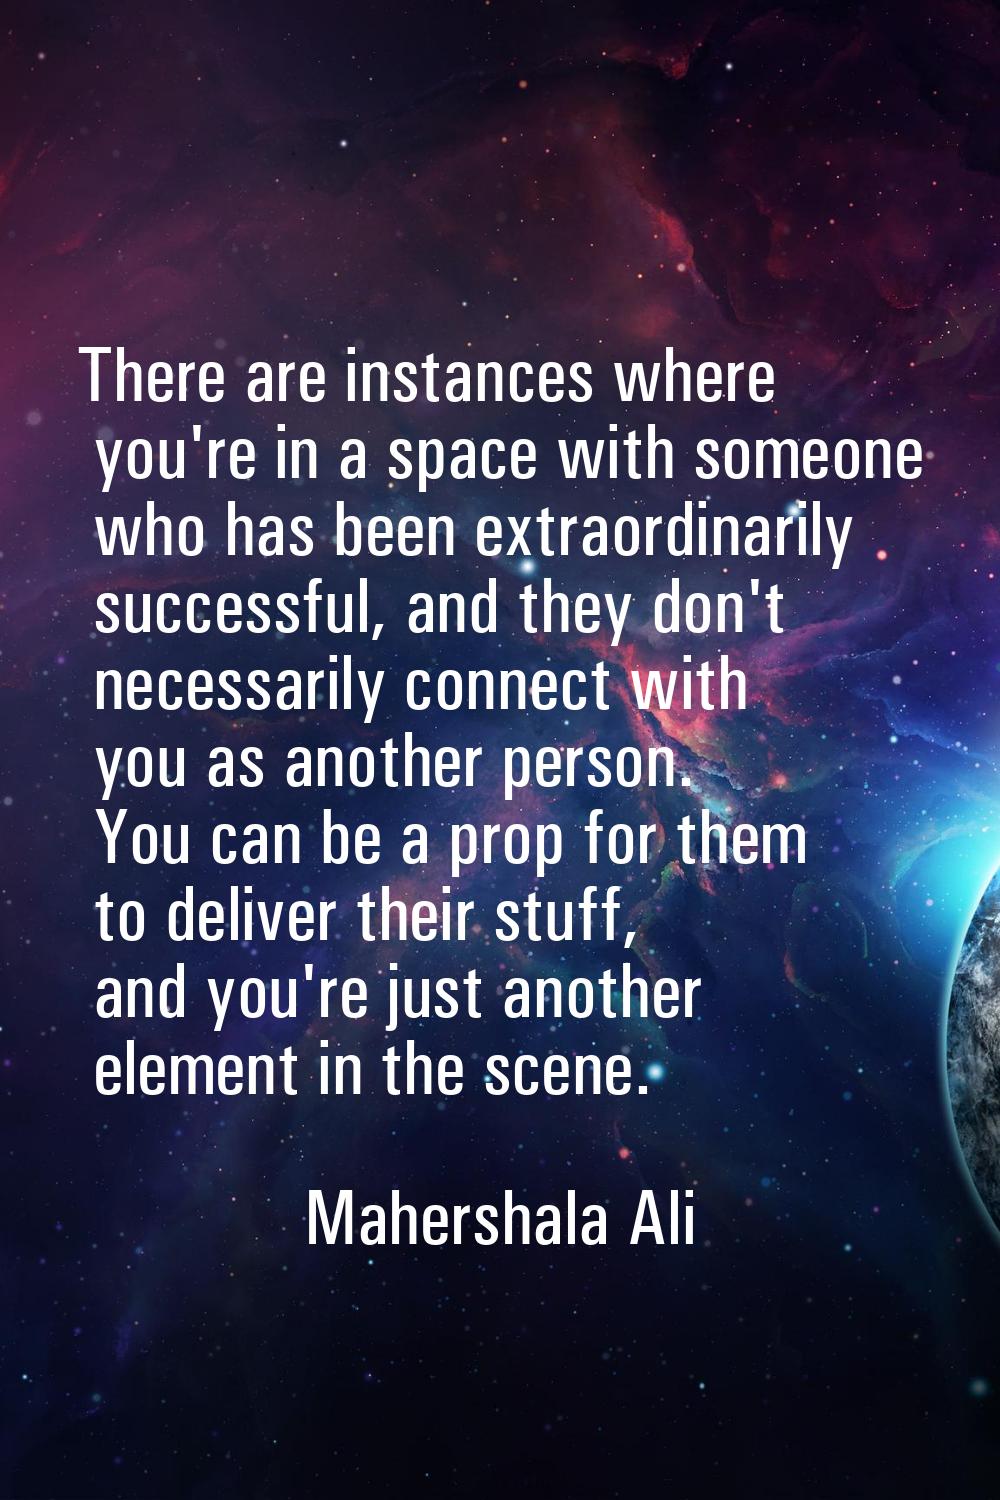 There are instances where you're in a space with someone who has been extraordinarily successful, a